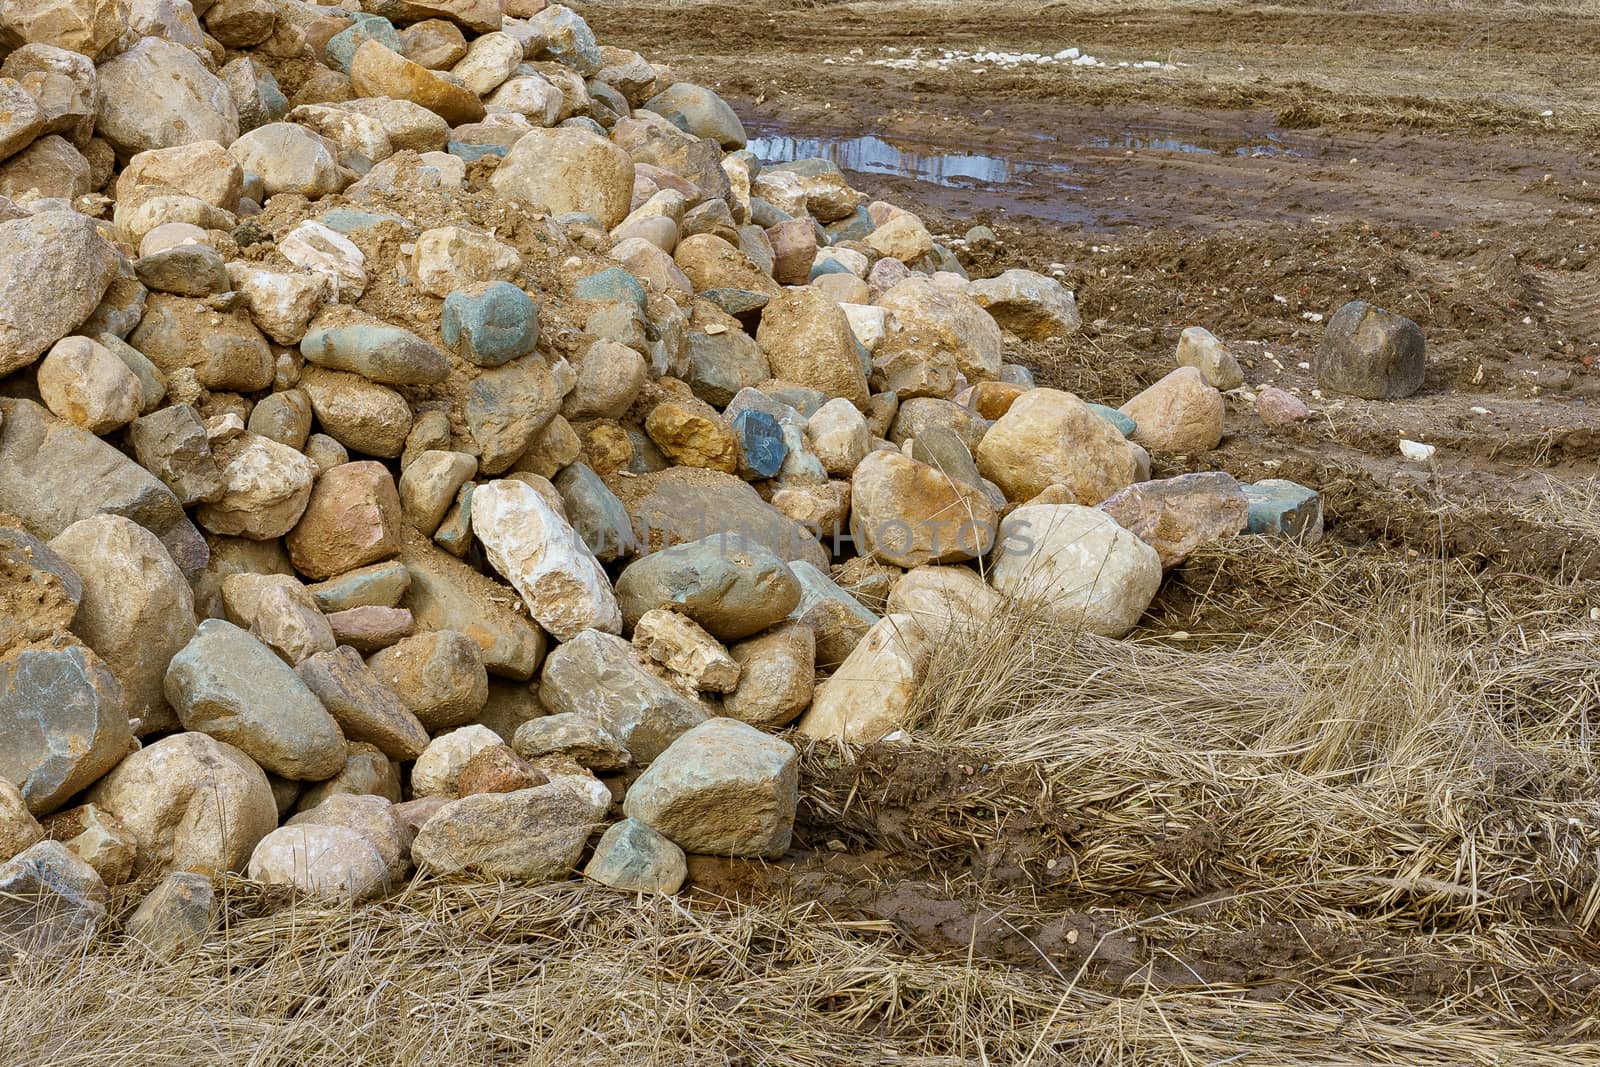 pile of cobblestones with sand prepared for construction